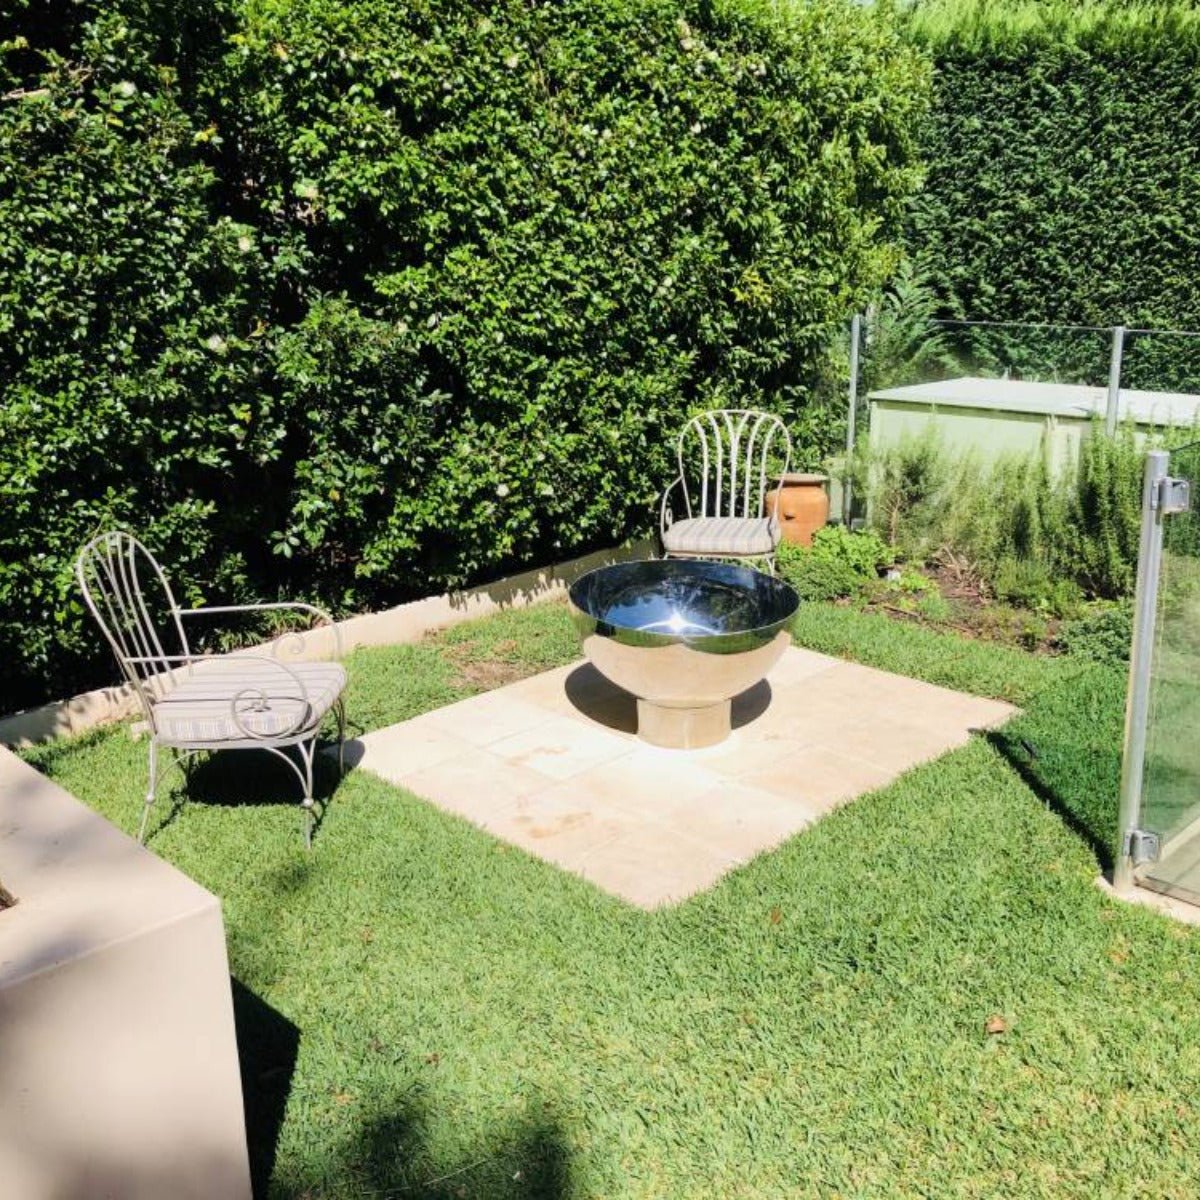 Goblet Stainless Steel Fire Pit - Outdoorium